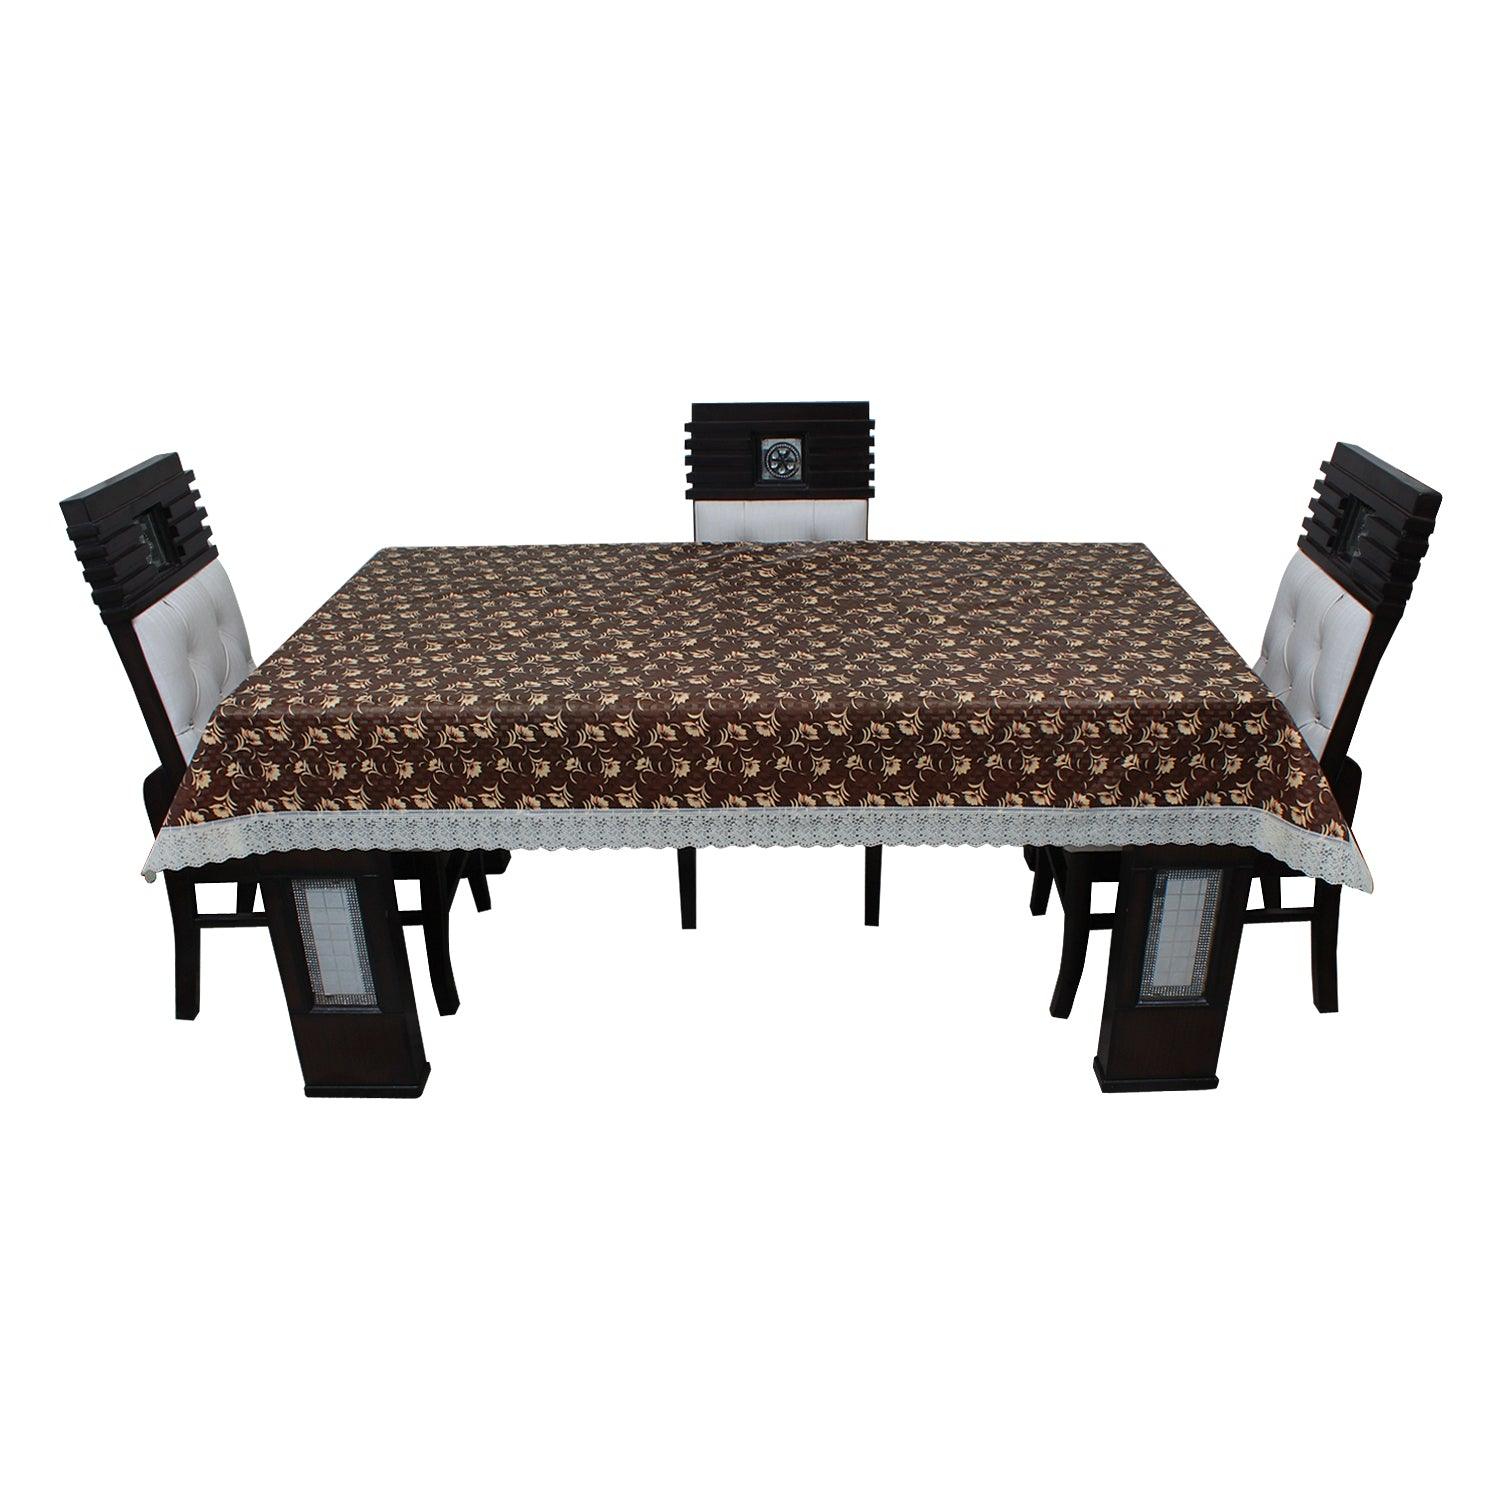 Waterproof and Dustproof Dining Table Cover, SA36 - Dream Care Furnishings Private Limited